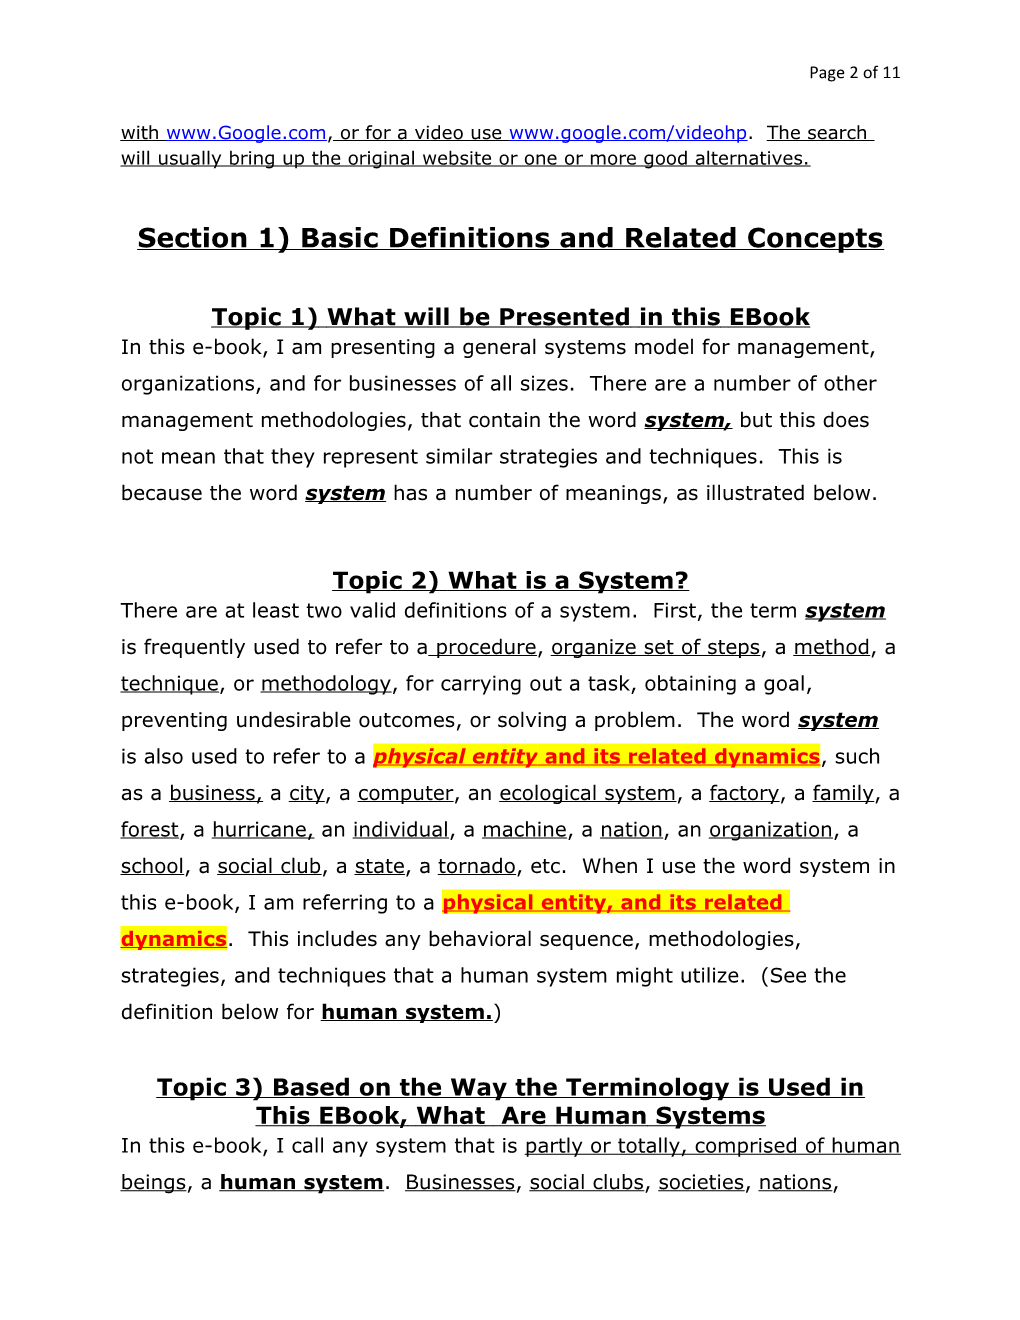 Concepts of Management for Business, and Other Human Systems, Chapter 1) Basic Definitions